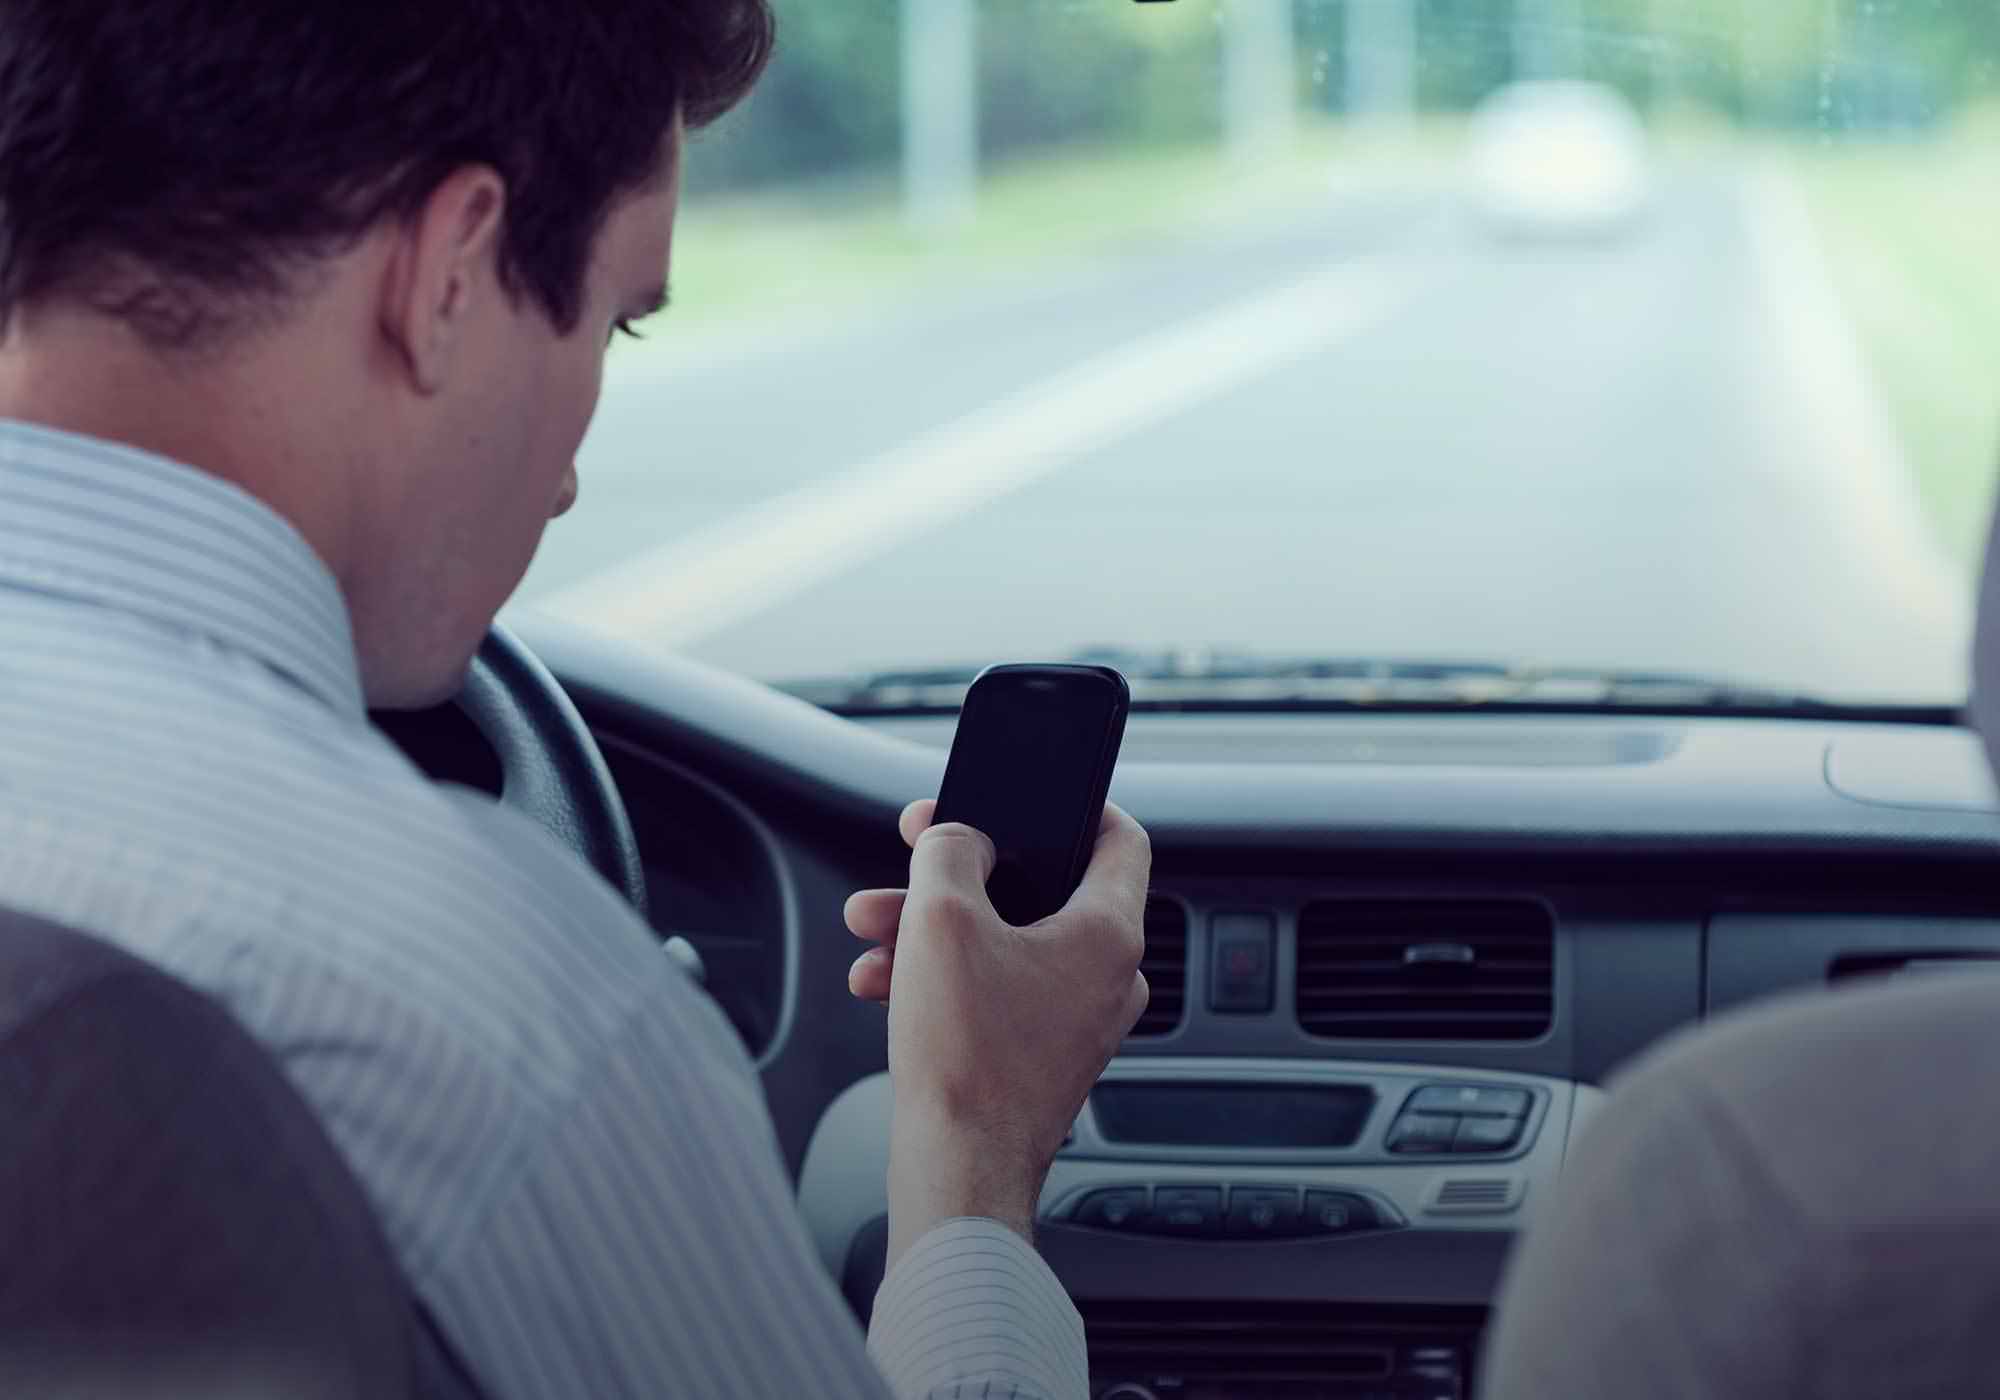 Reducing distractions while driving